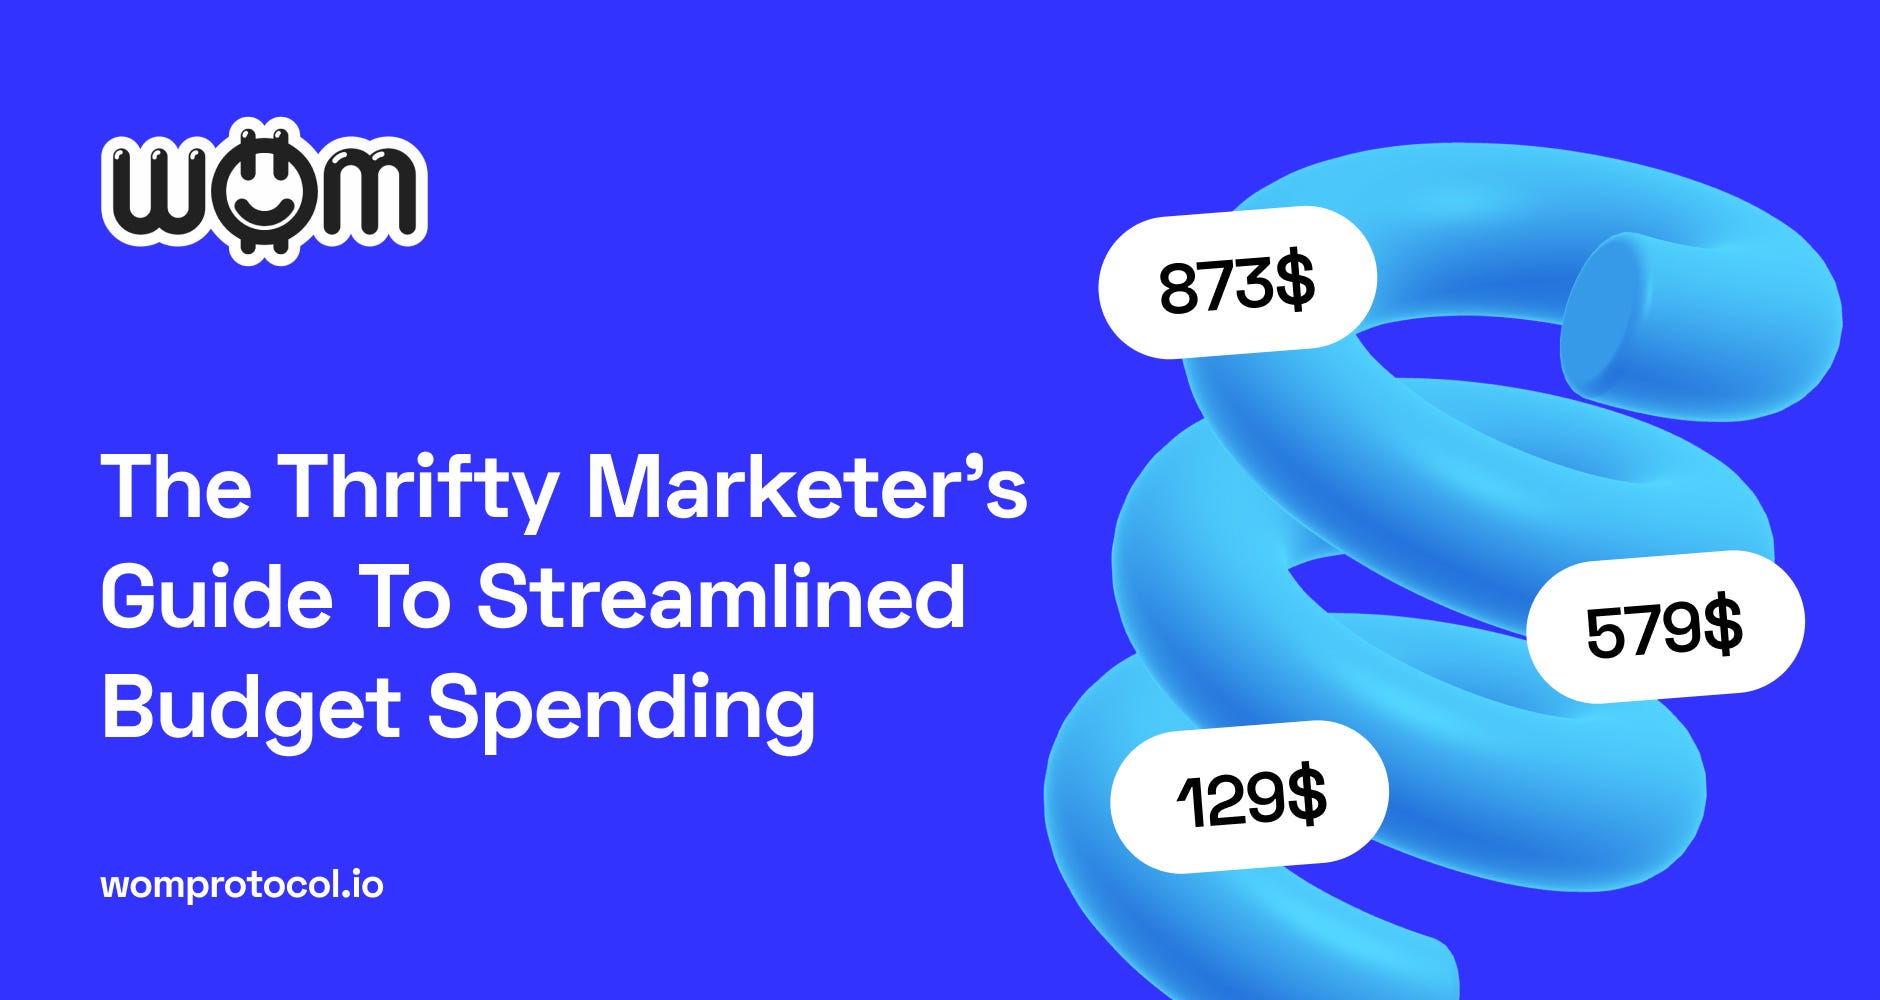 The Thrifty Marketer’s Guide To Streamlined Budget Spending